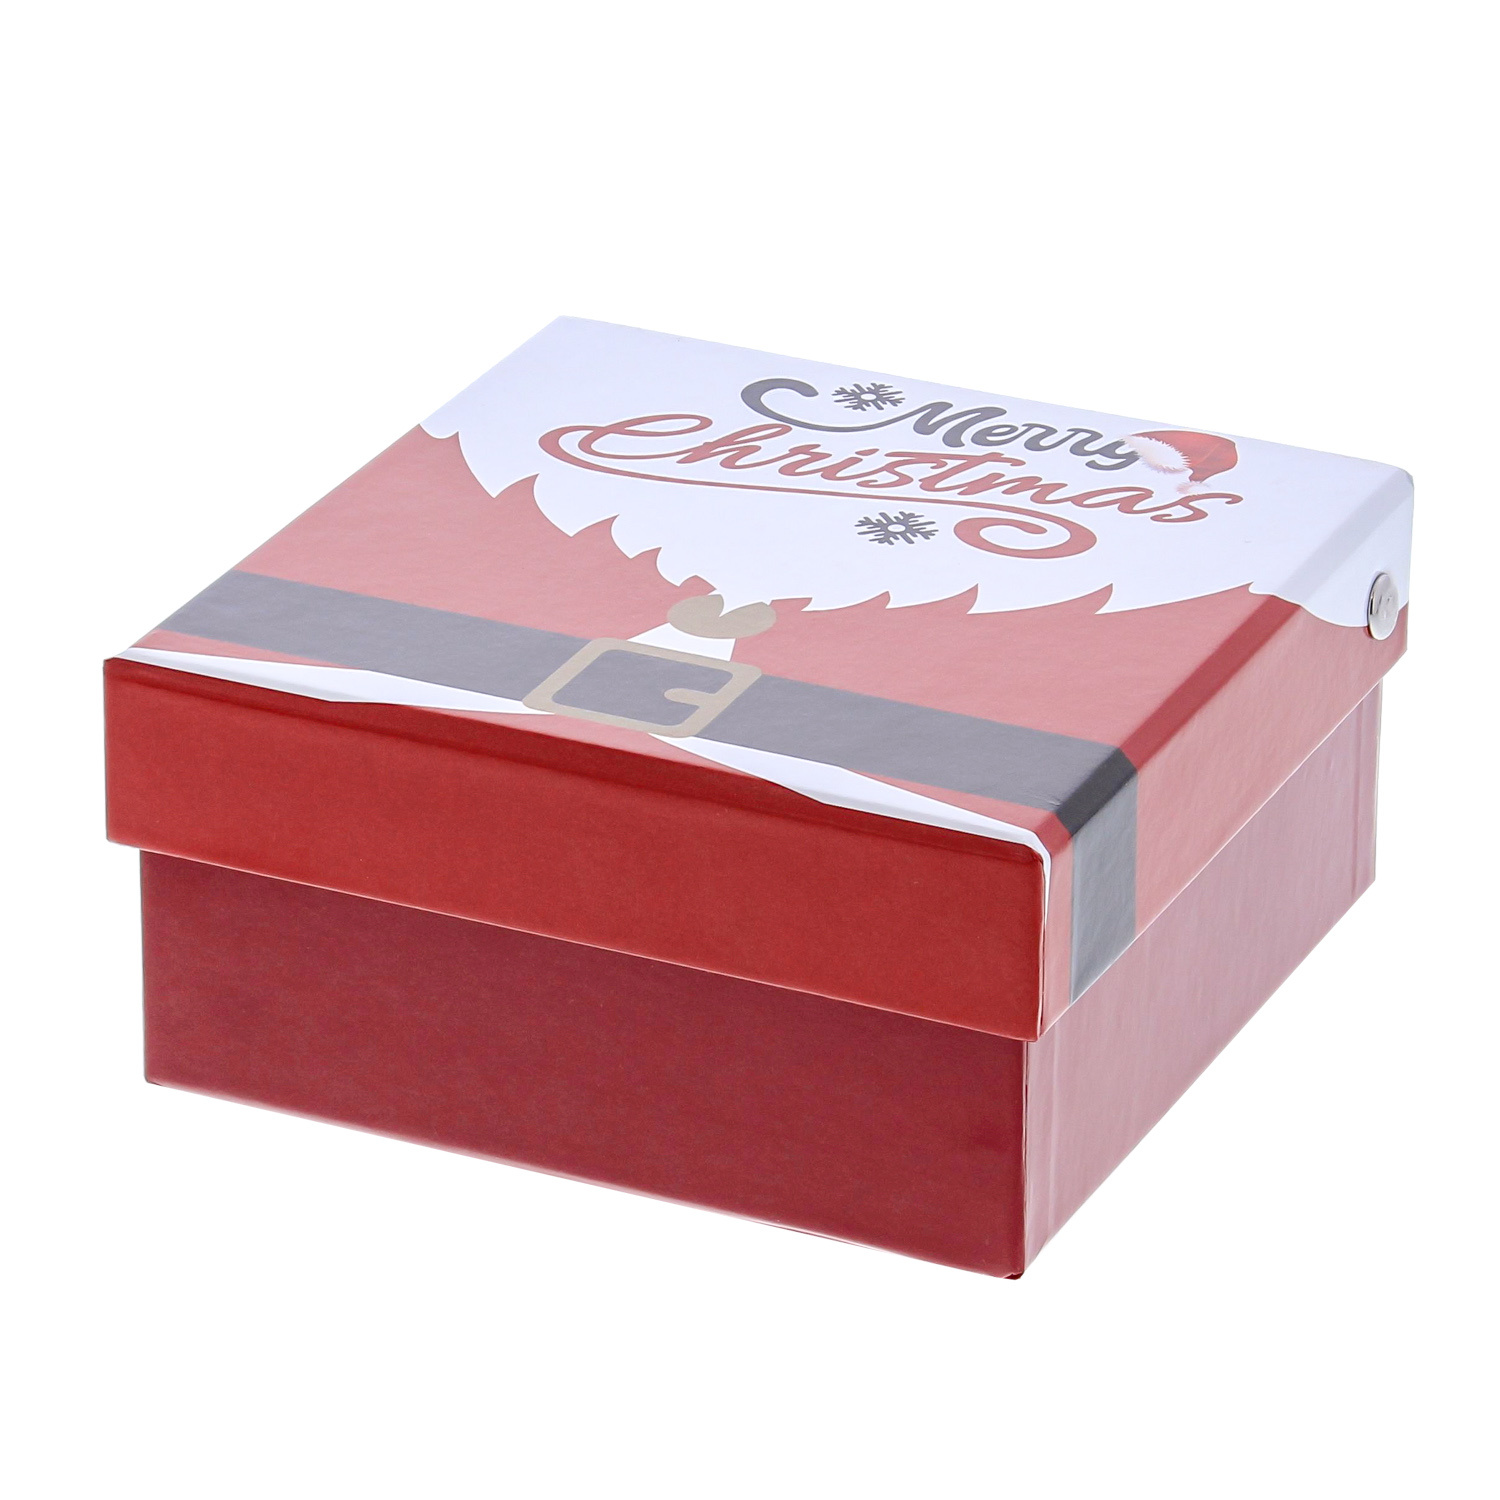 "Santa Belly" Box with lid square medium 130*127*62 mm - 10 pieces